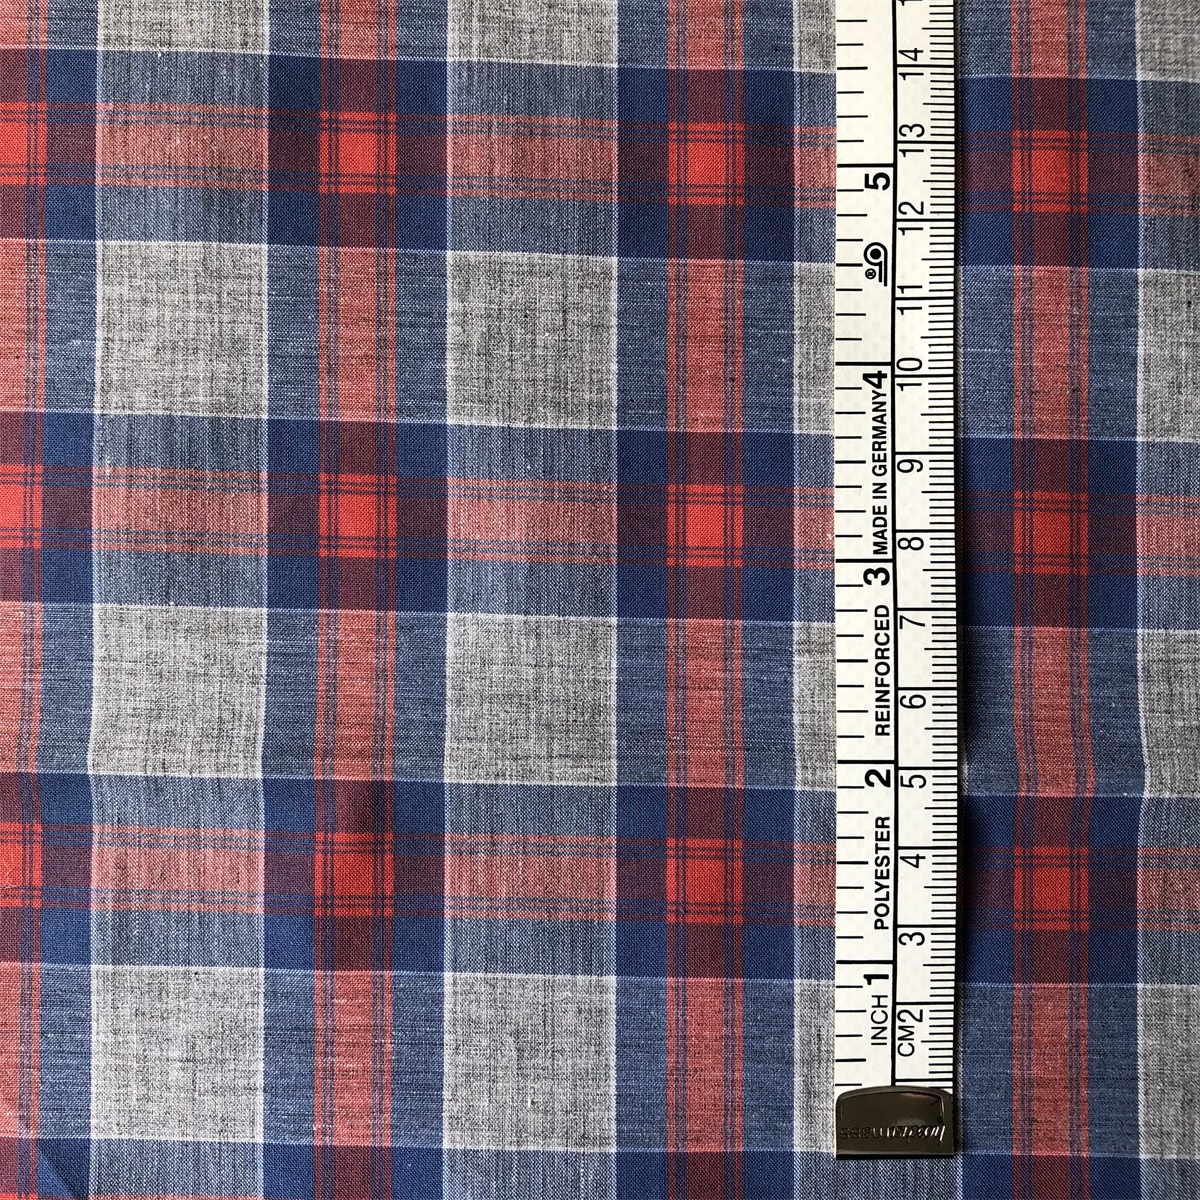 Yarn Dyed Fabric by melange dyed yarn 100% cotton yarn dyed poplin plain check shirts woven fabric for men's casual shirts